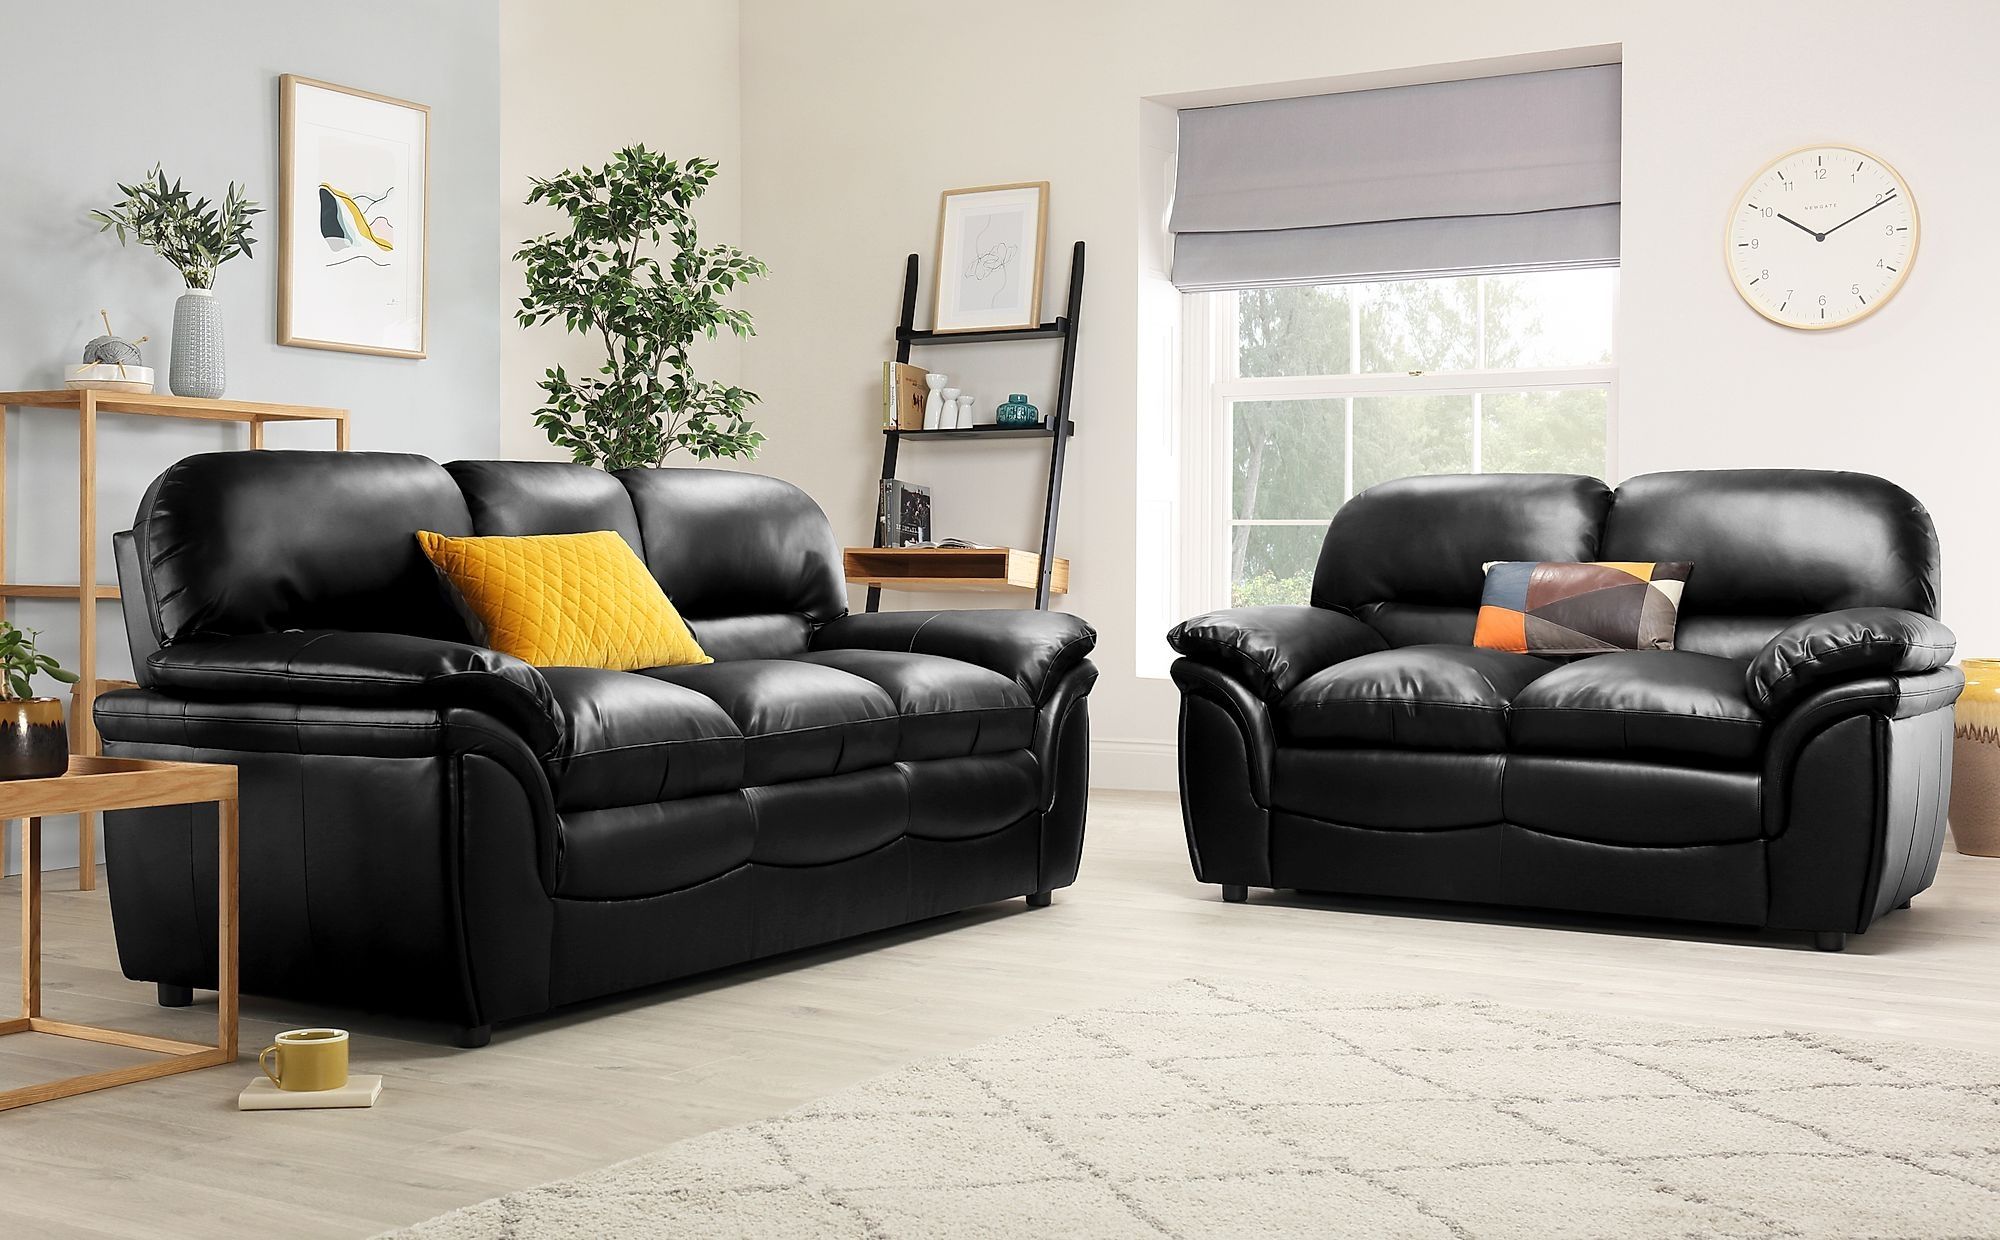 8 Photos Rochester Black Leather 3 Seater Sofa And Description – Alqu Blog Regarding 3 Seat L Shaped Sofas In Black (Gallery 12 of 20)